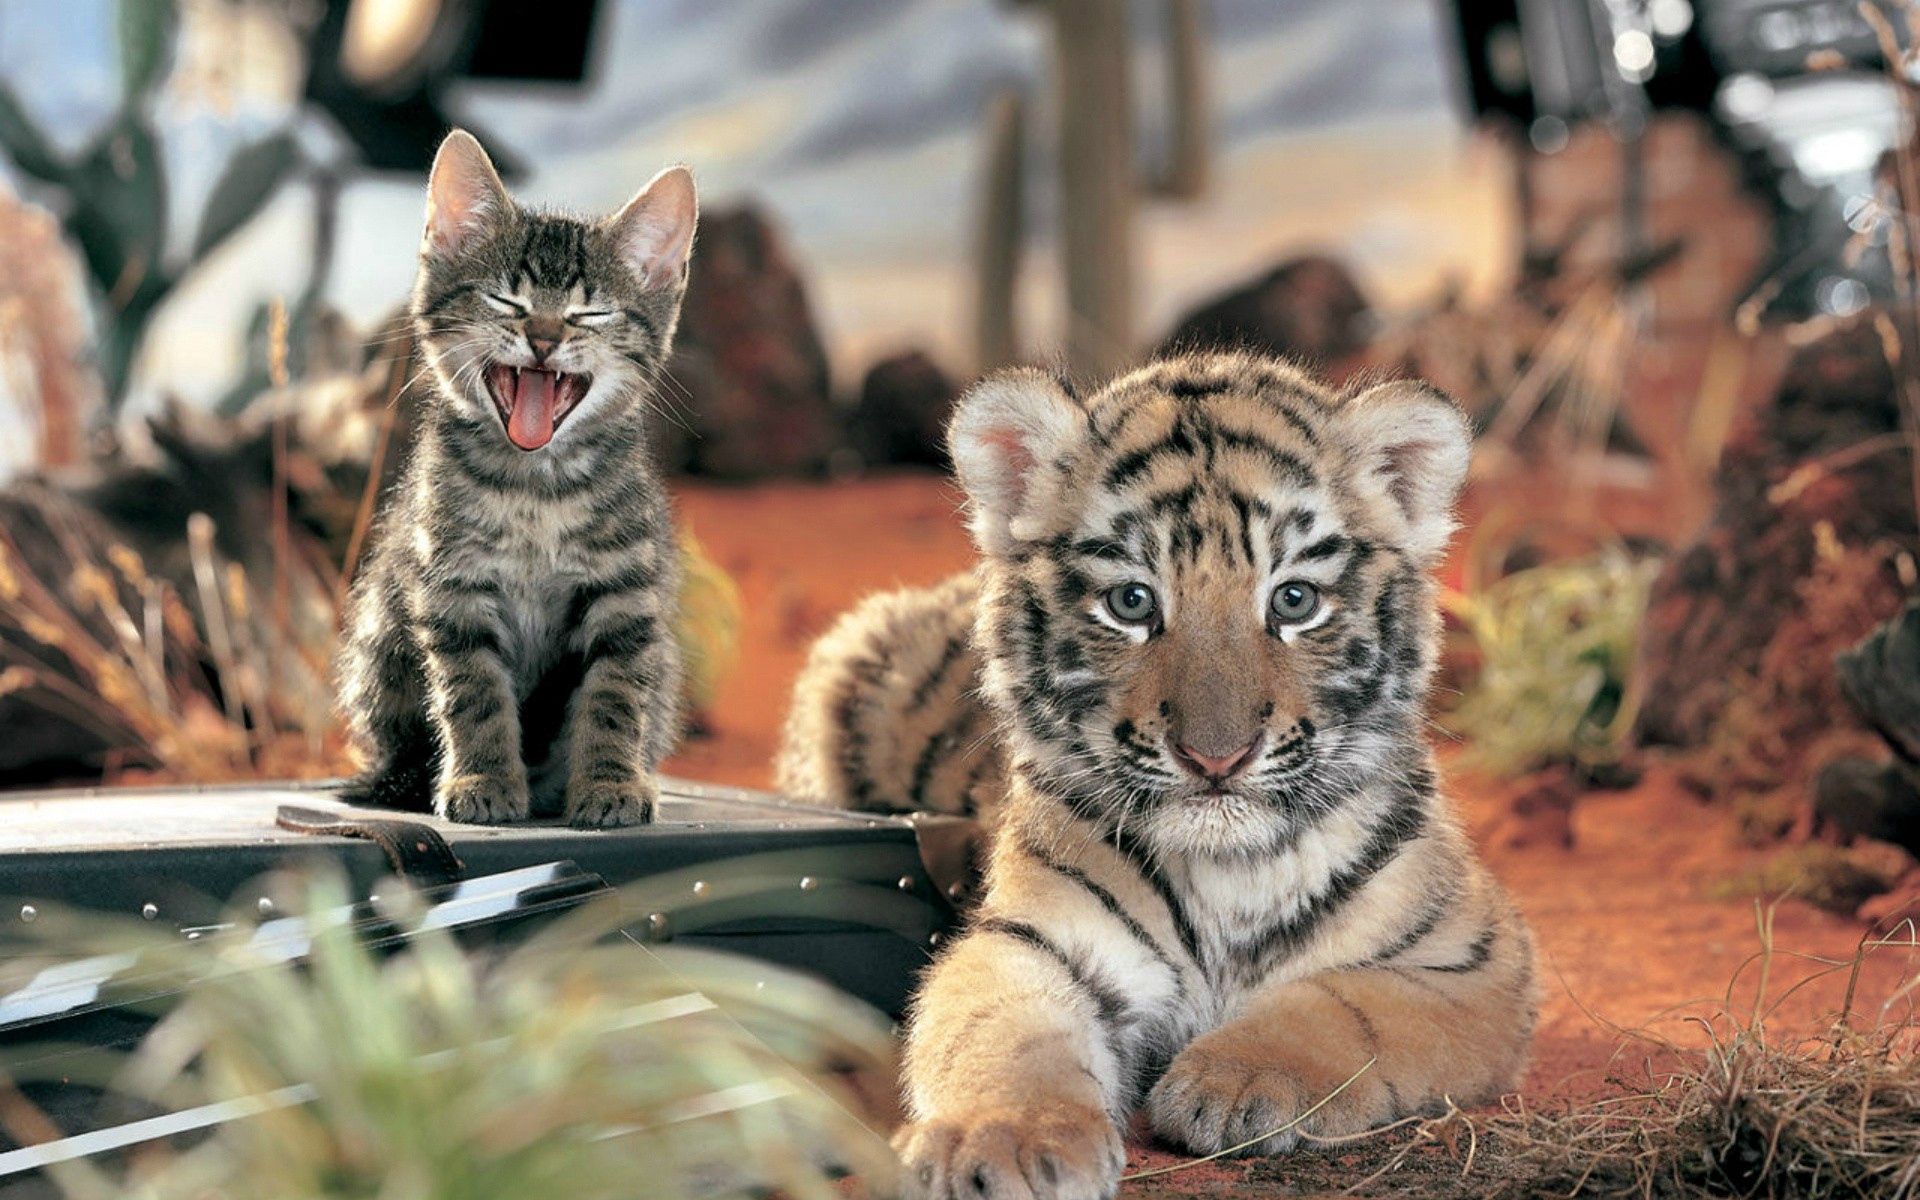 Full HD cats, animals, kitty, kitten, to lie down, lie, tiger, open mouth, scream, cry, tiger cub